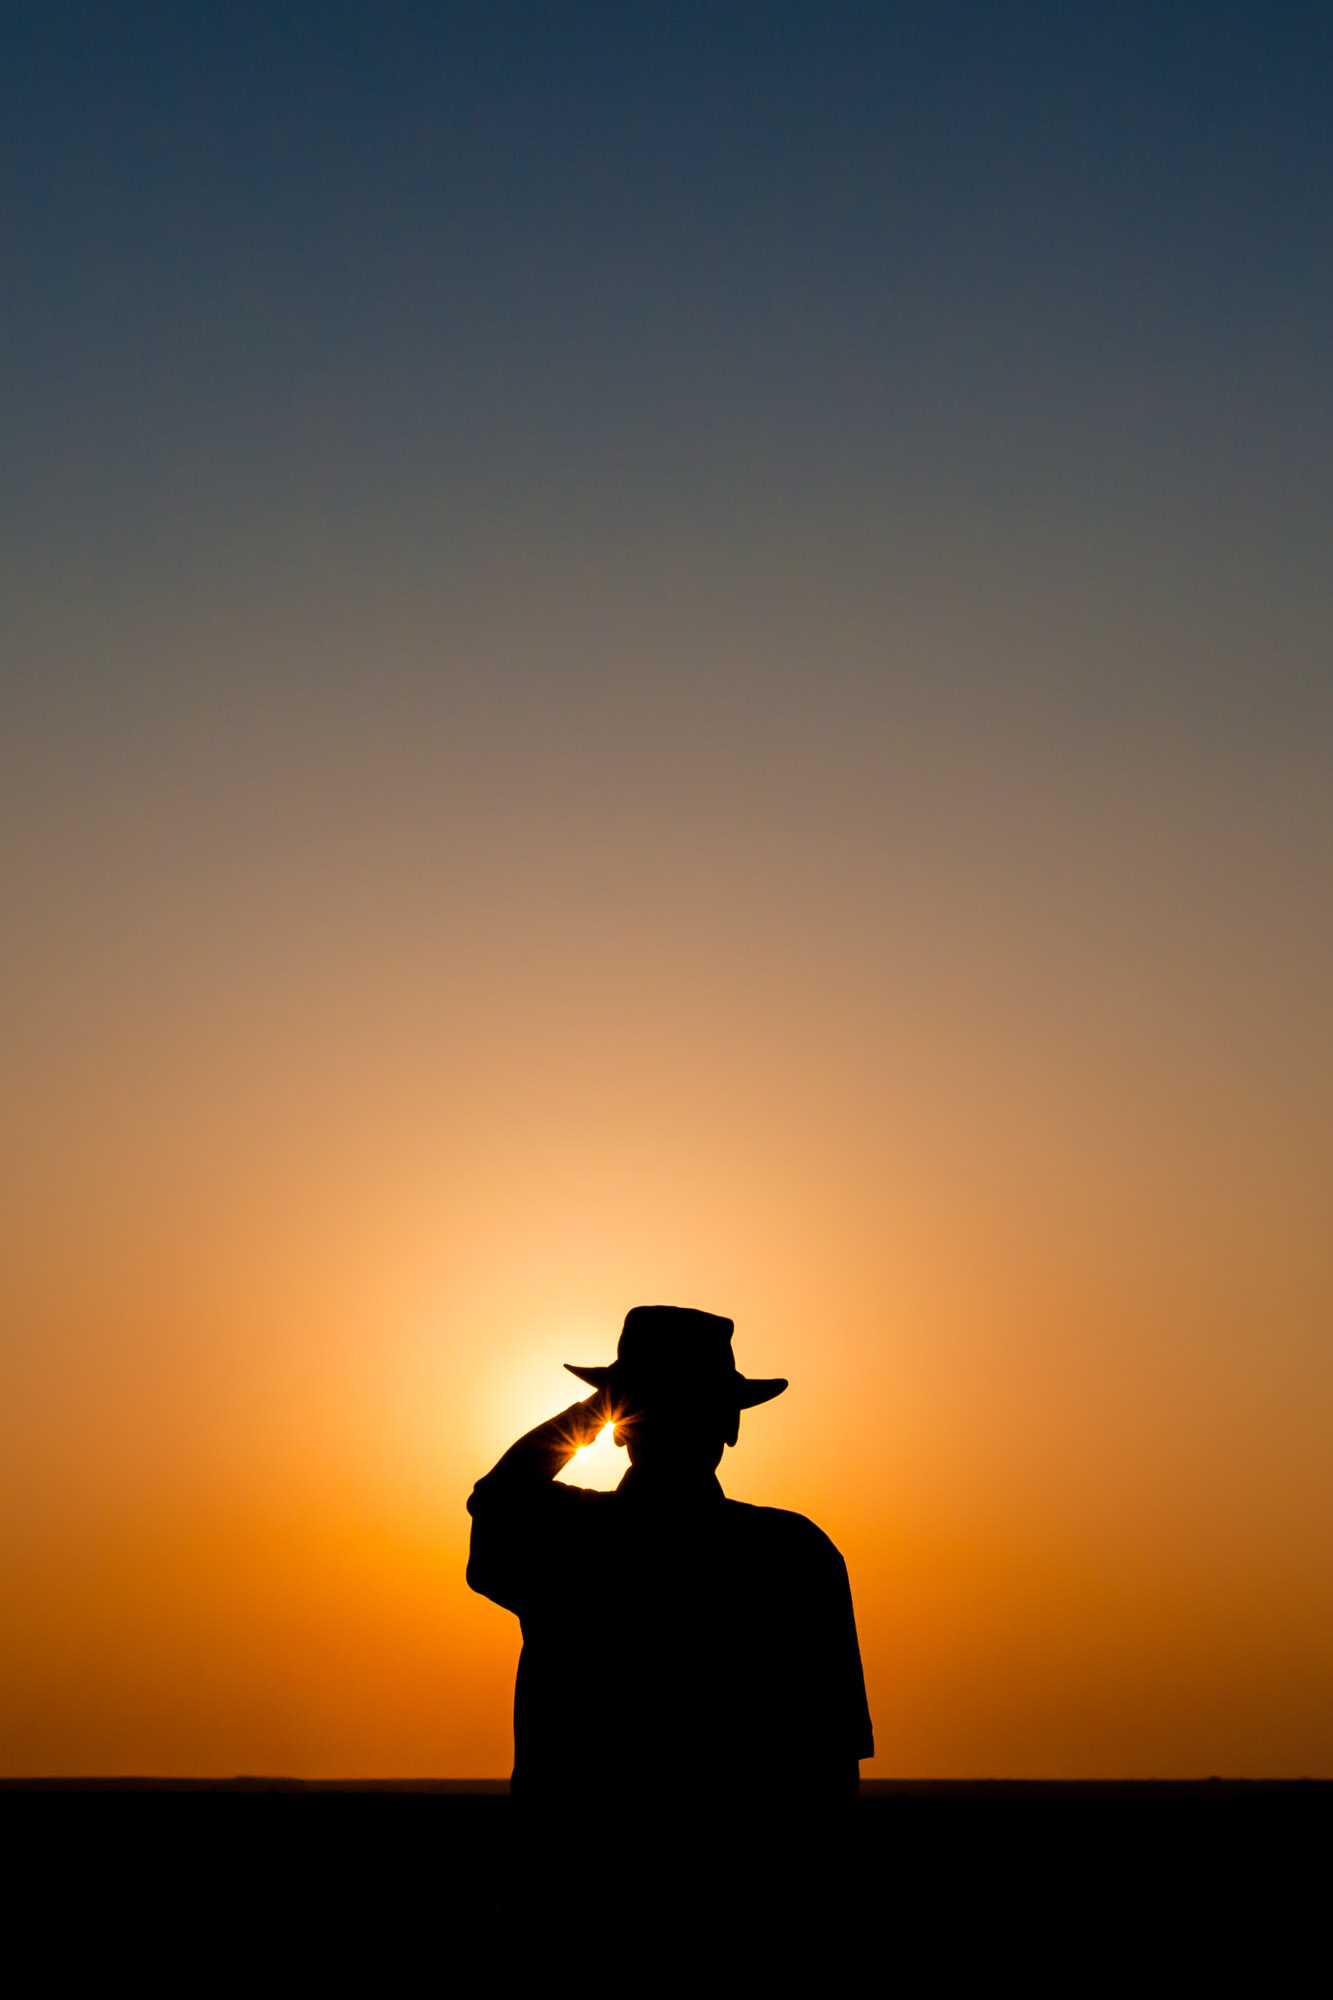 Farmer staring at setting sun - Melrose, New Mexico - Fred Wasmer ...